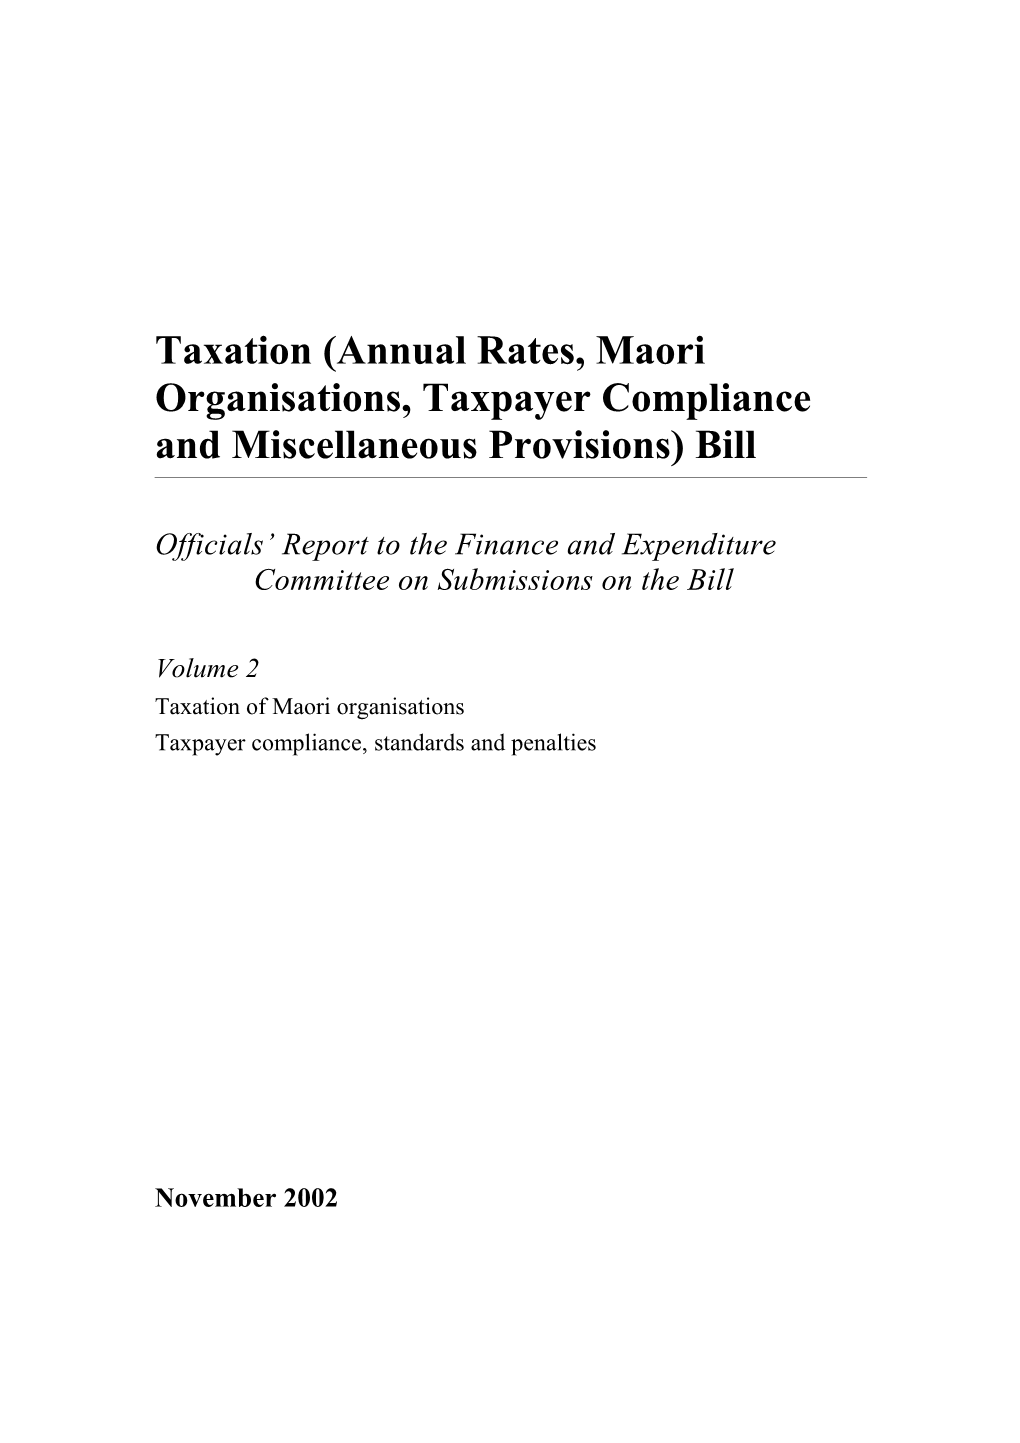 Taxation (Annual Rates, Maori Organisations, Taxpayer Compliance and Miscellaneous Provisions) s1